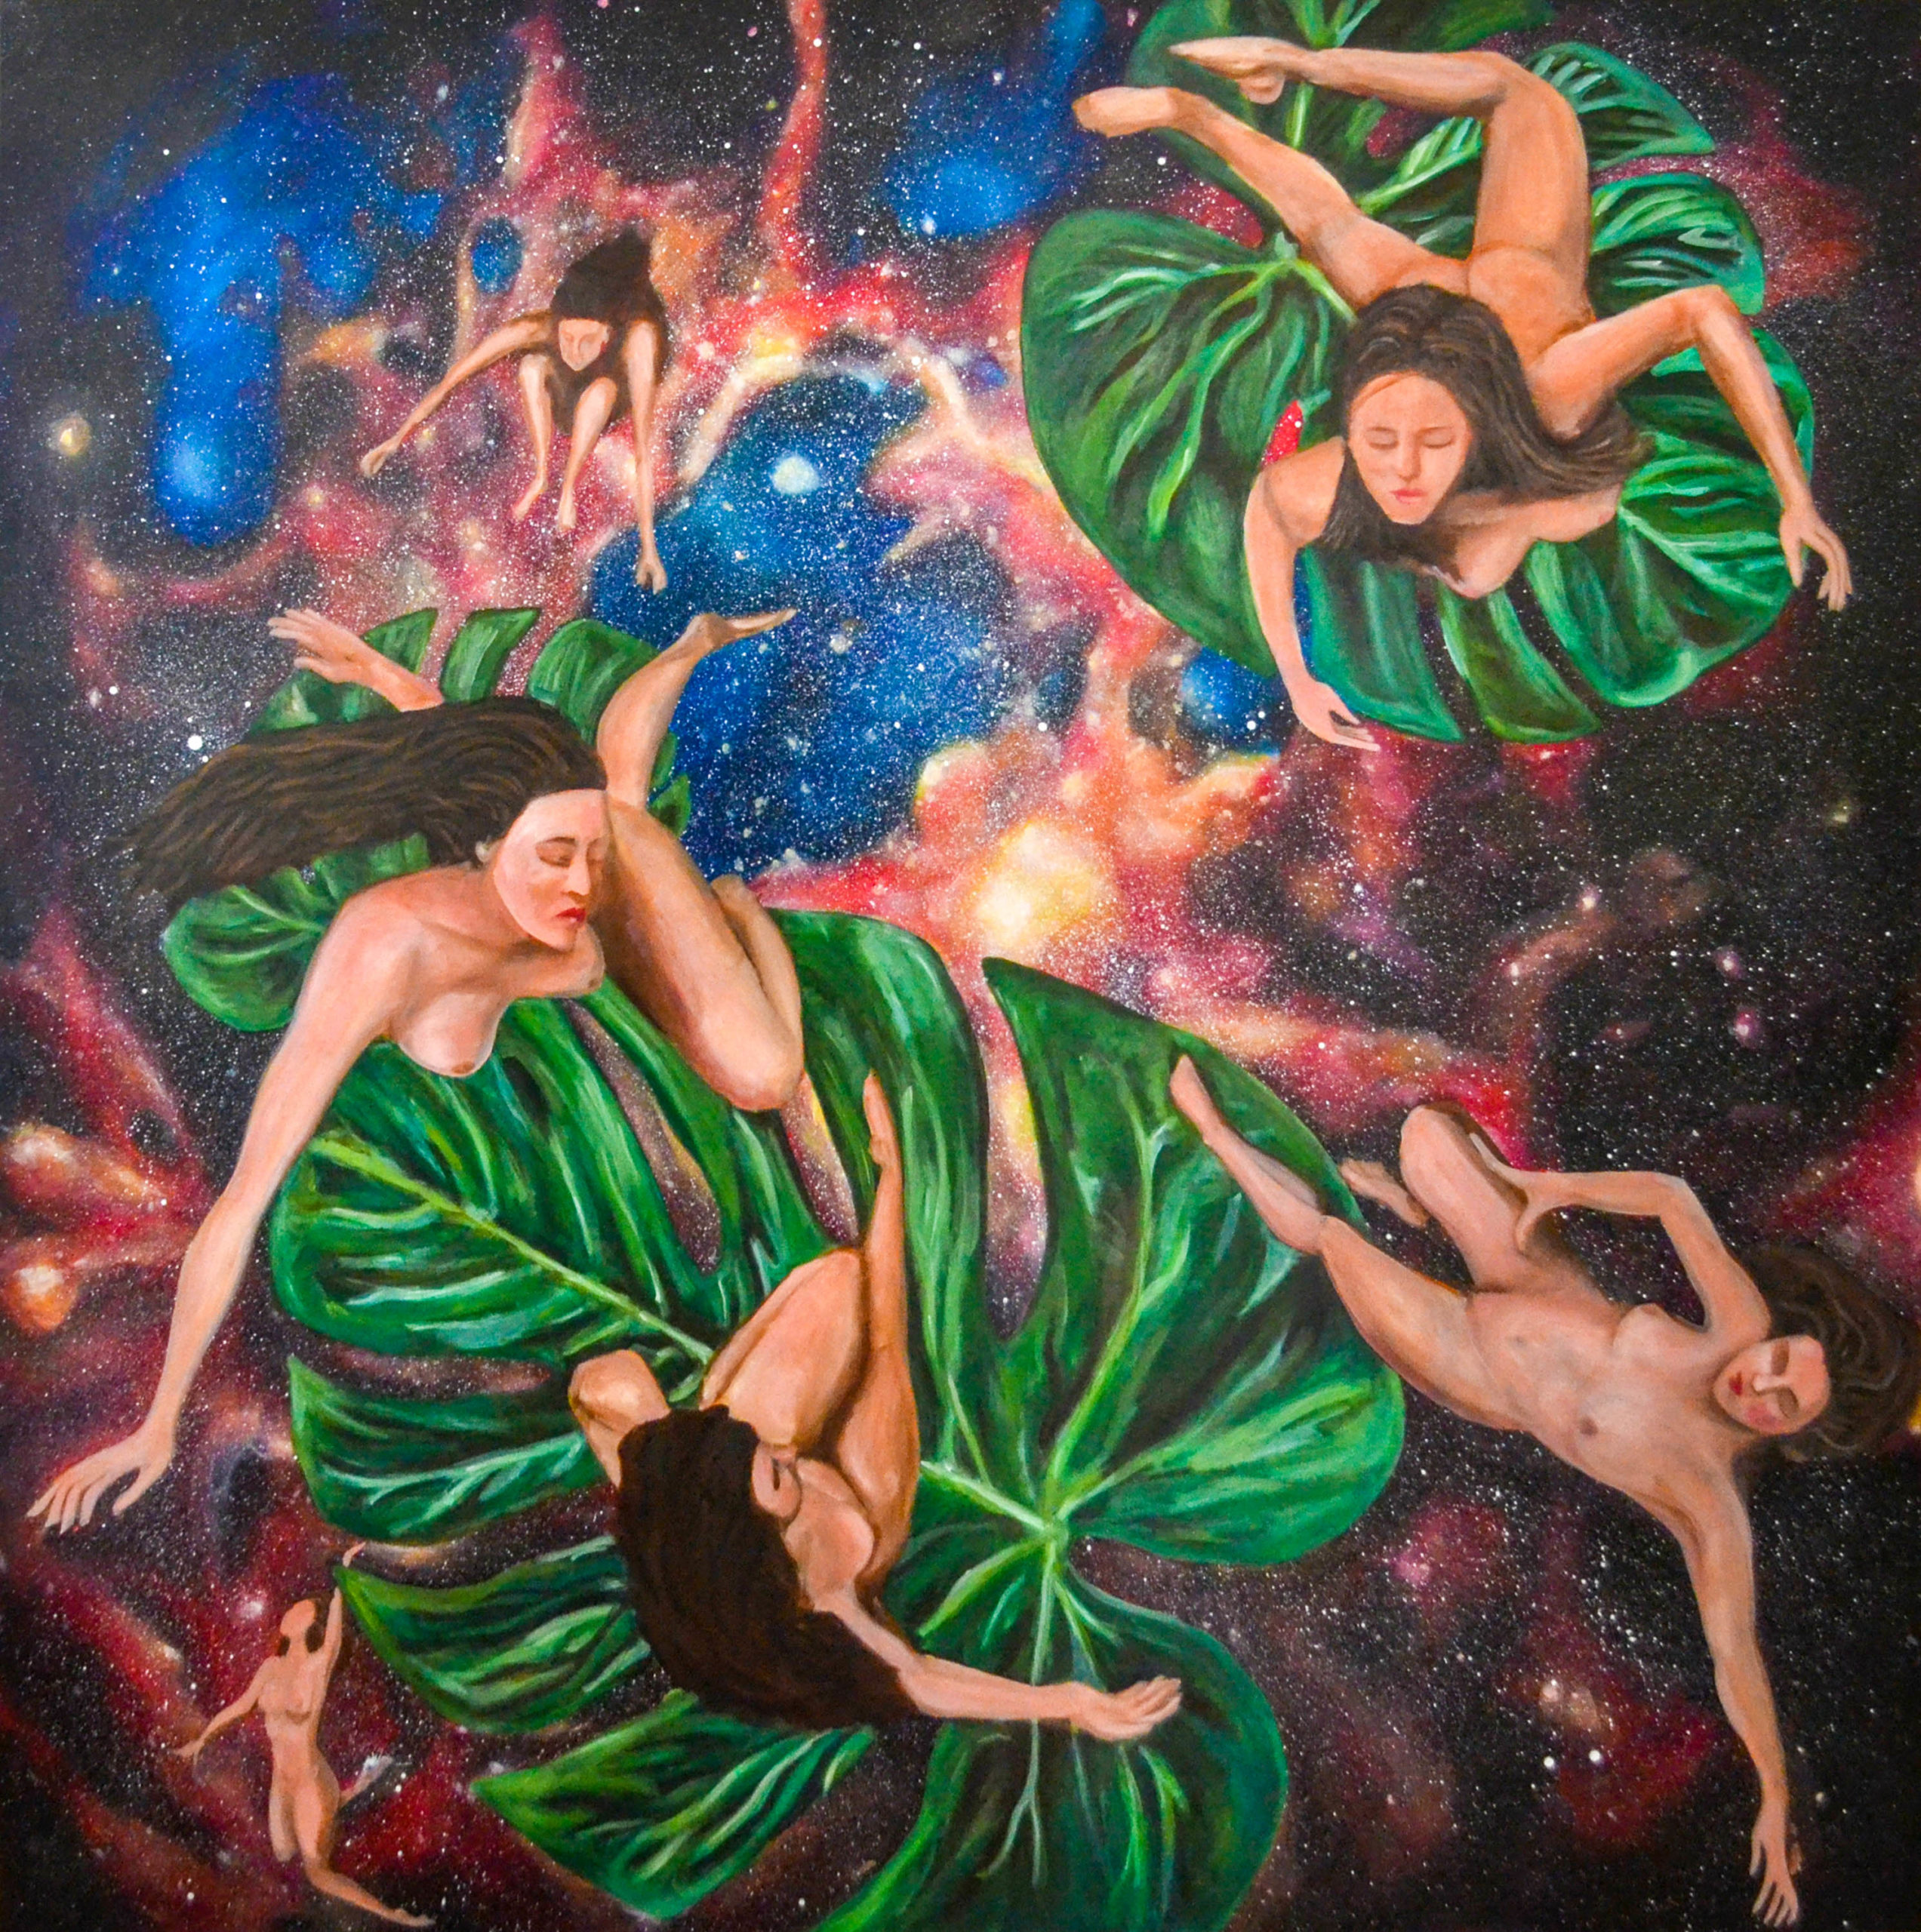 Floating in the universe